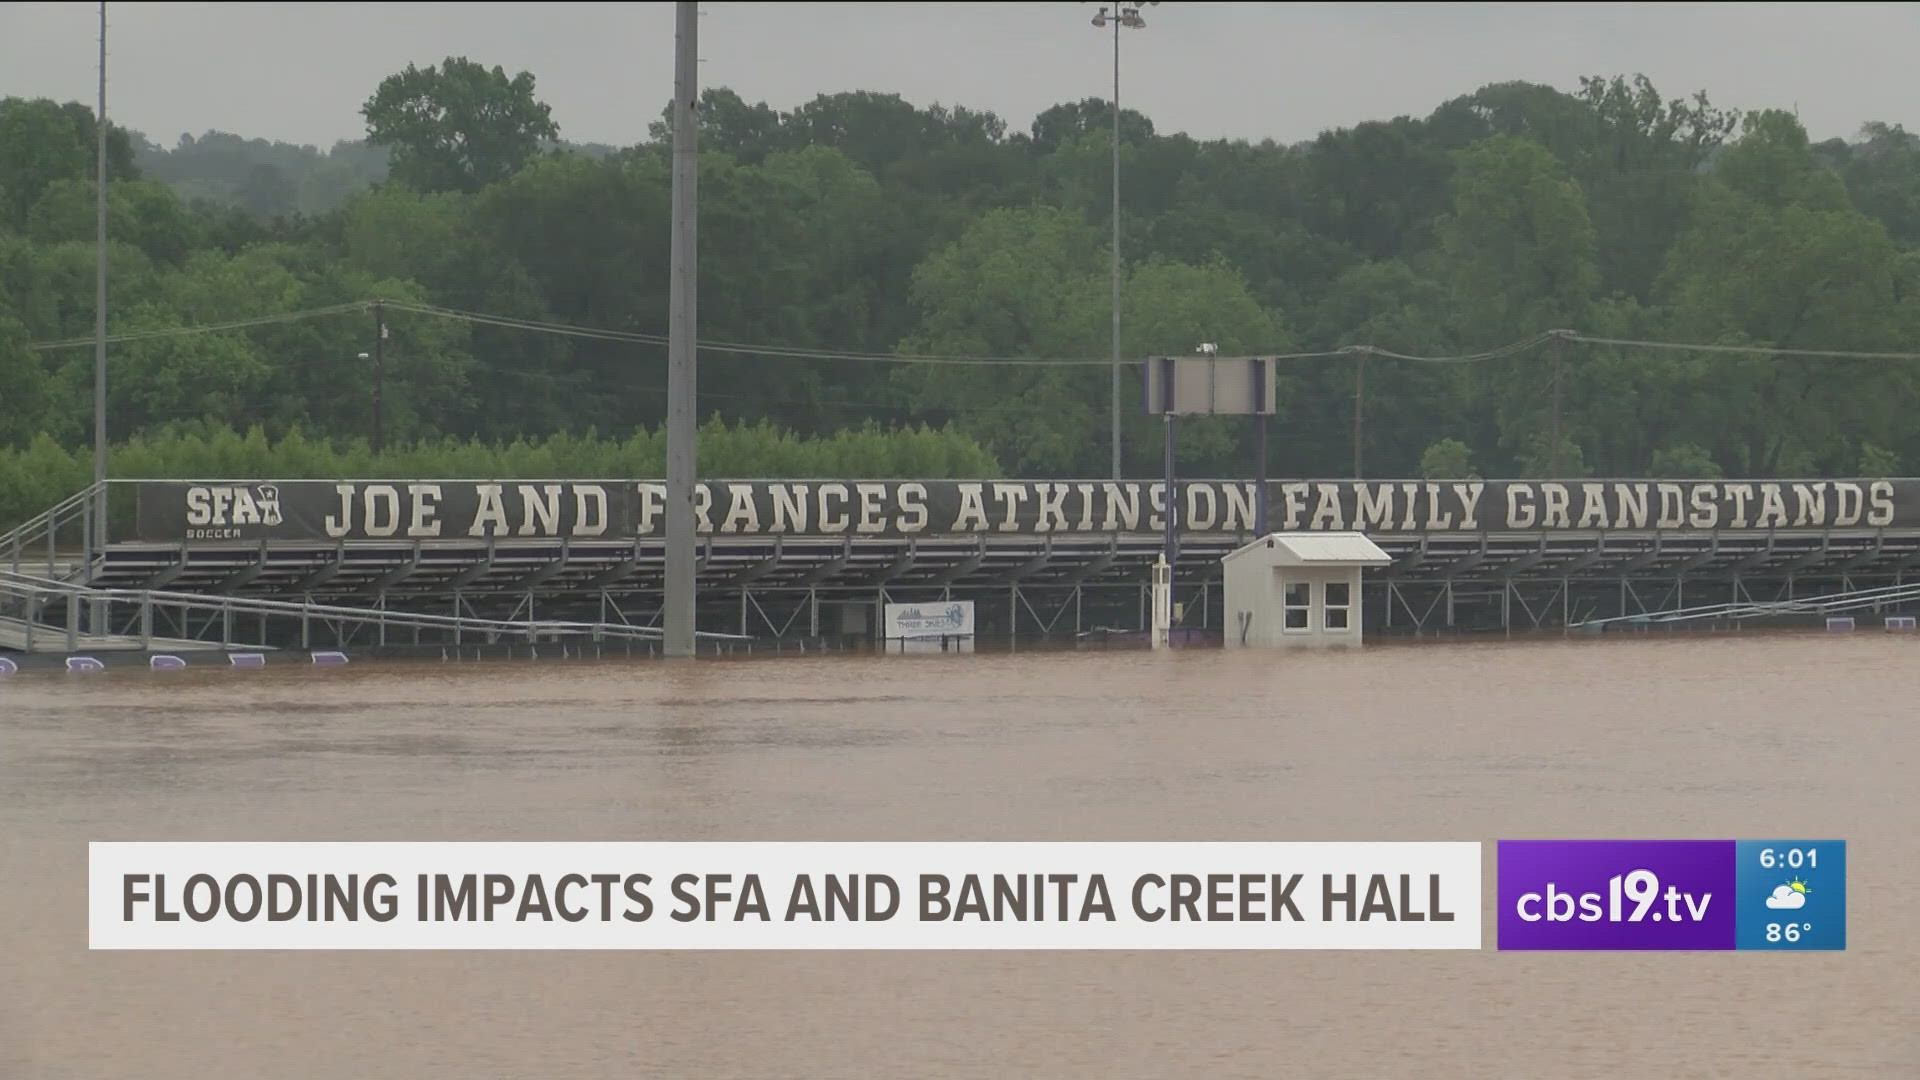 Flooding impacts Stephen F. Austin University and other businesses in Nacogdoches